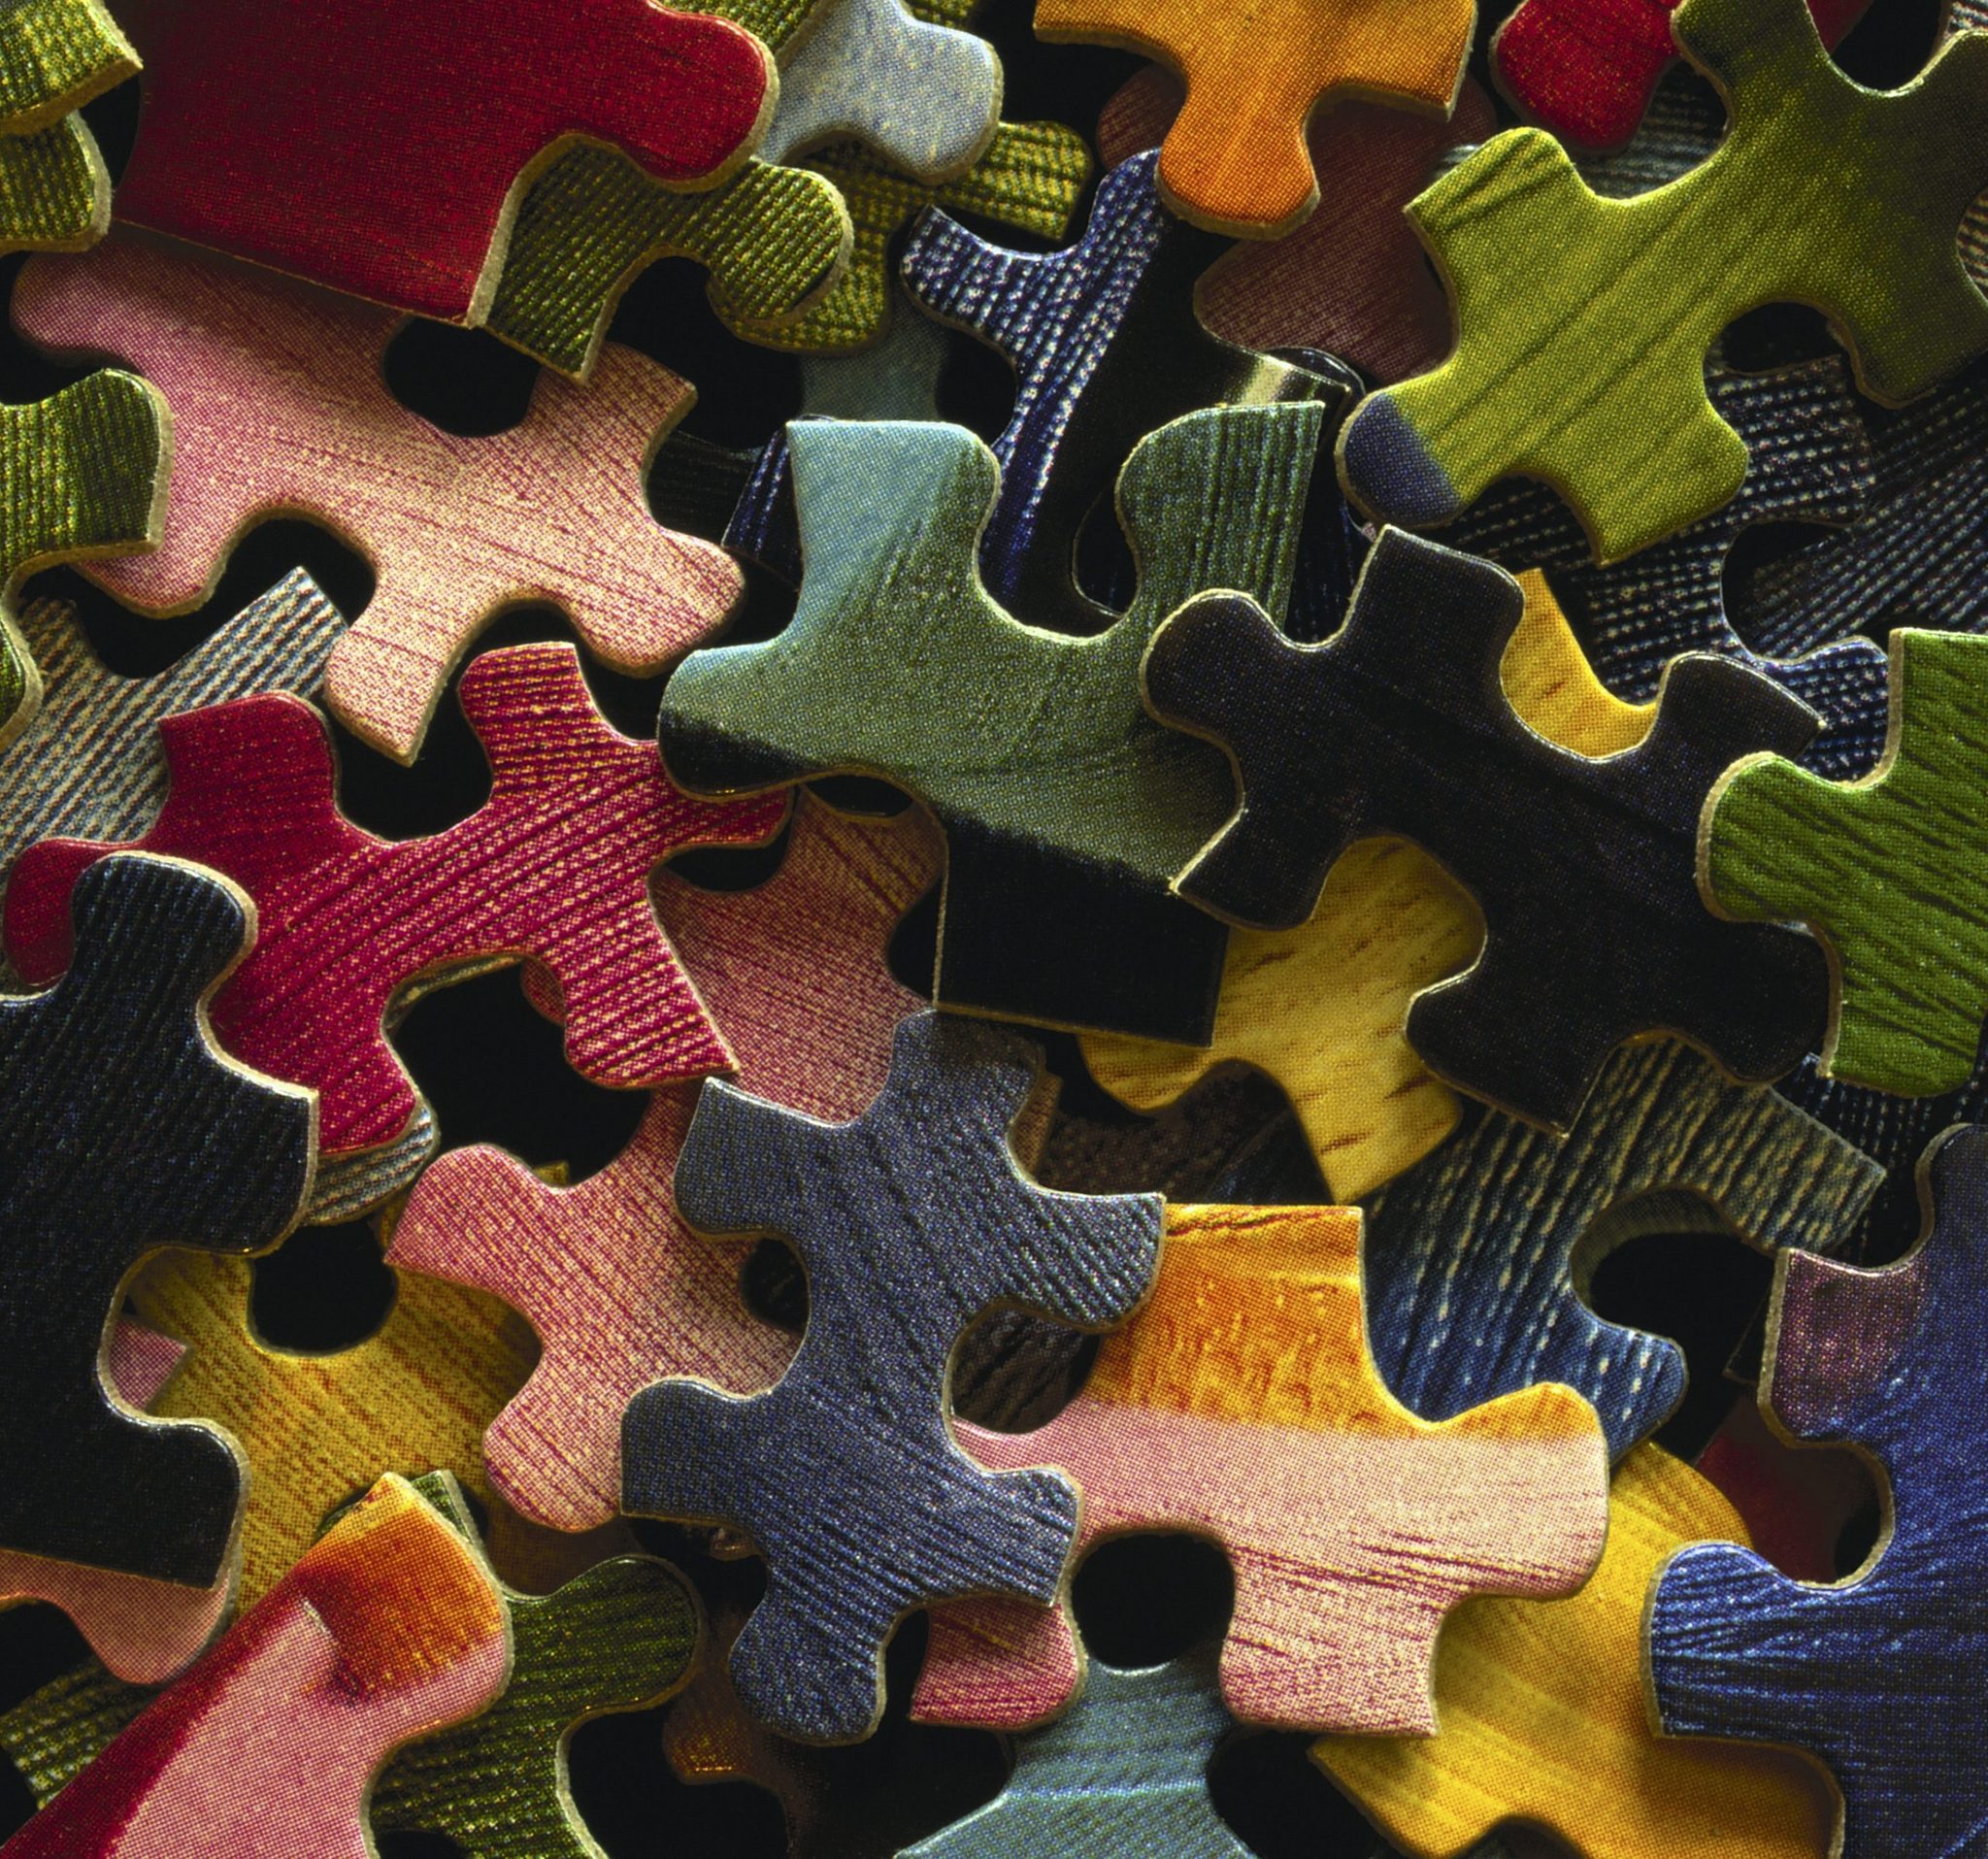 the-most-challenging-jigsaw-puzzles-you-can-buy-reader-s-digest